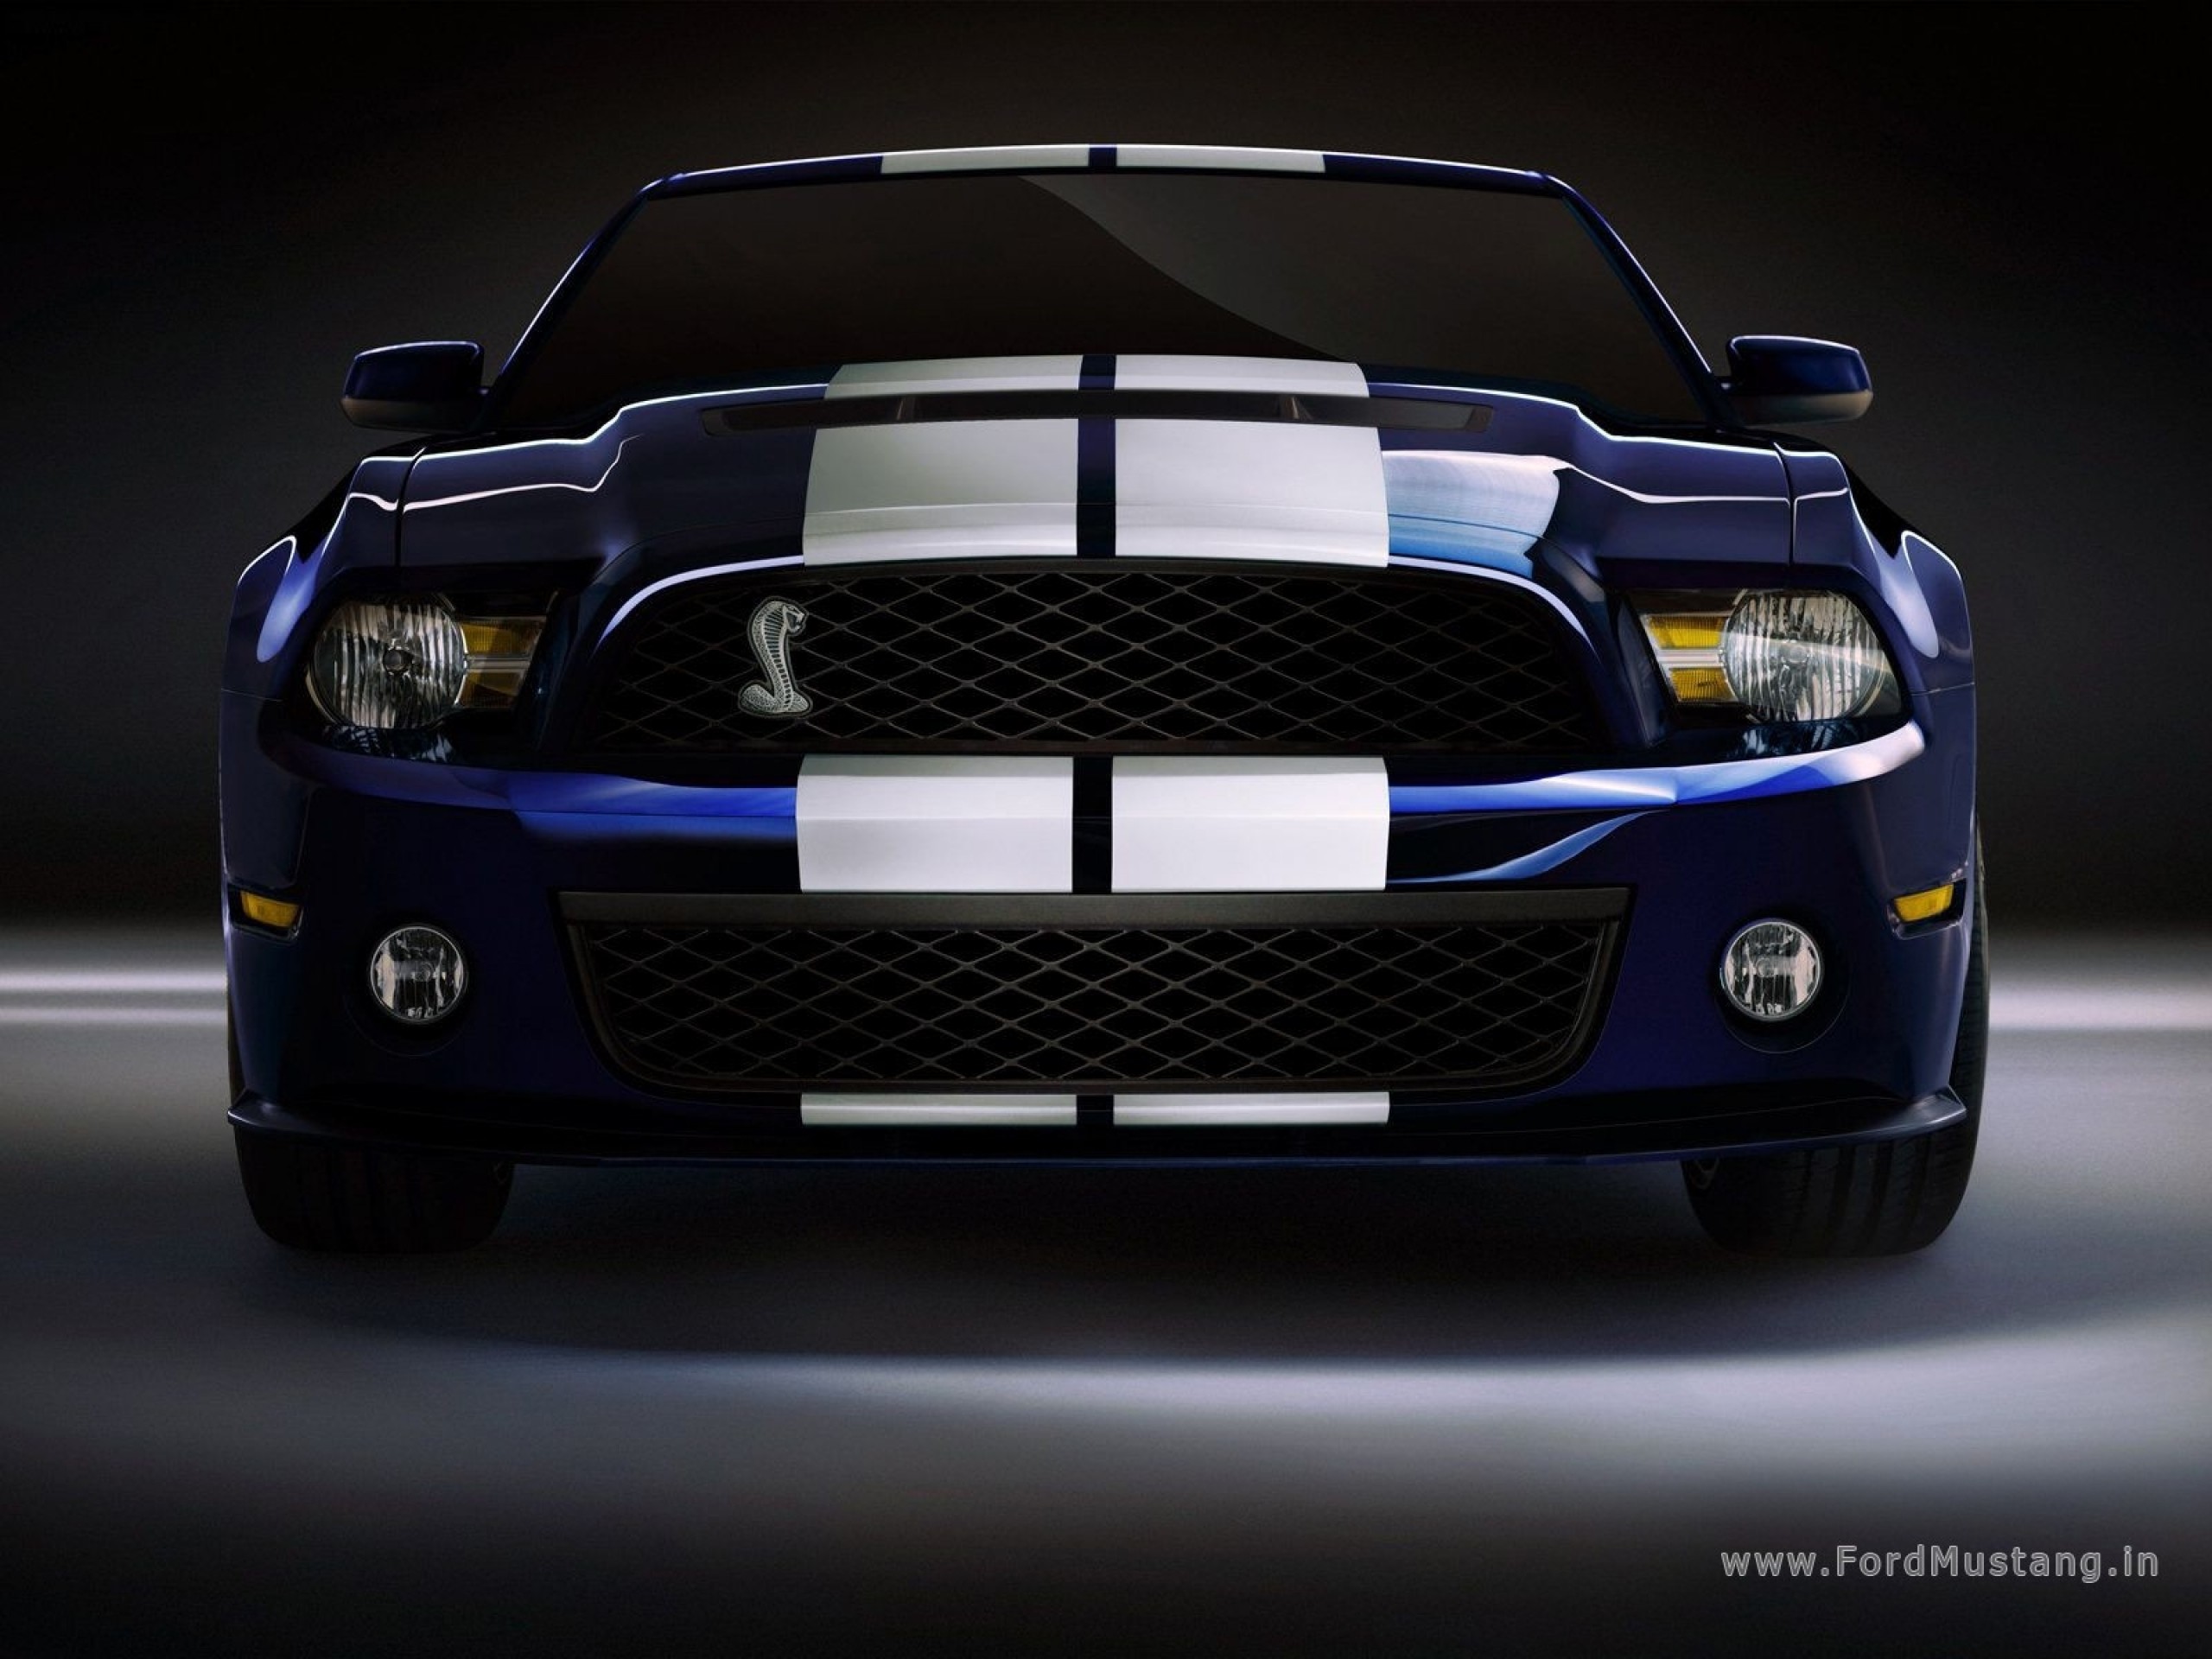 2560x1920 Ford Mustang Shelby GT500 Wallpaper HD 4 - 2560 X 1920